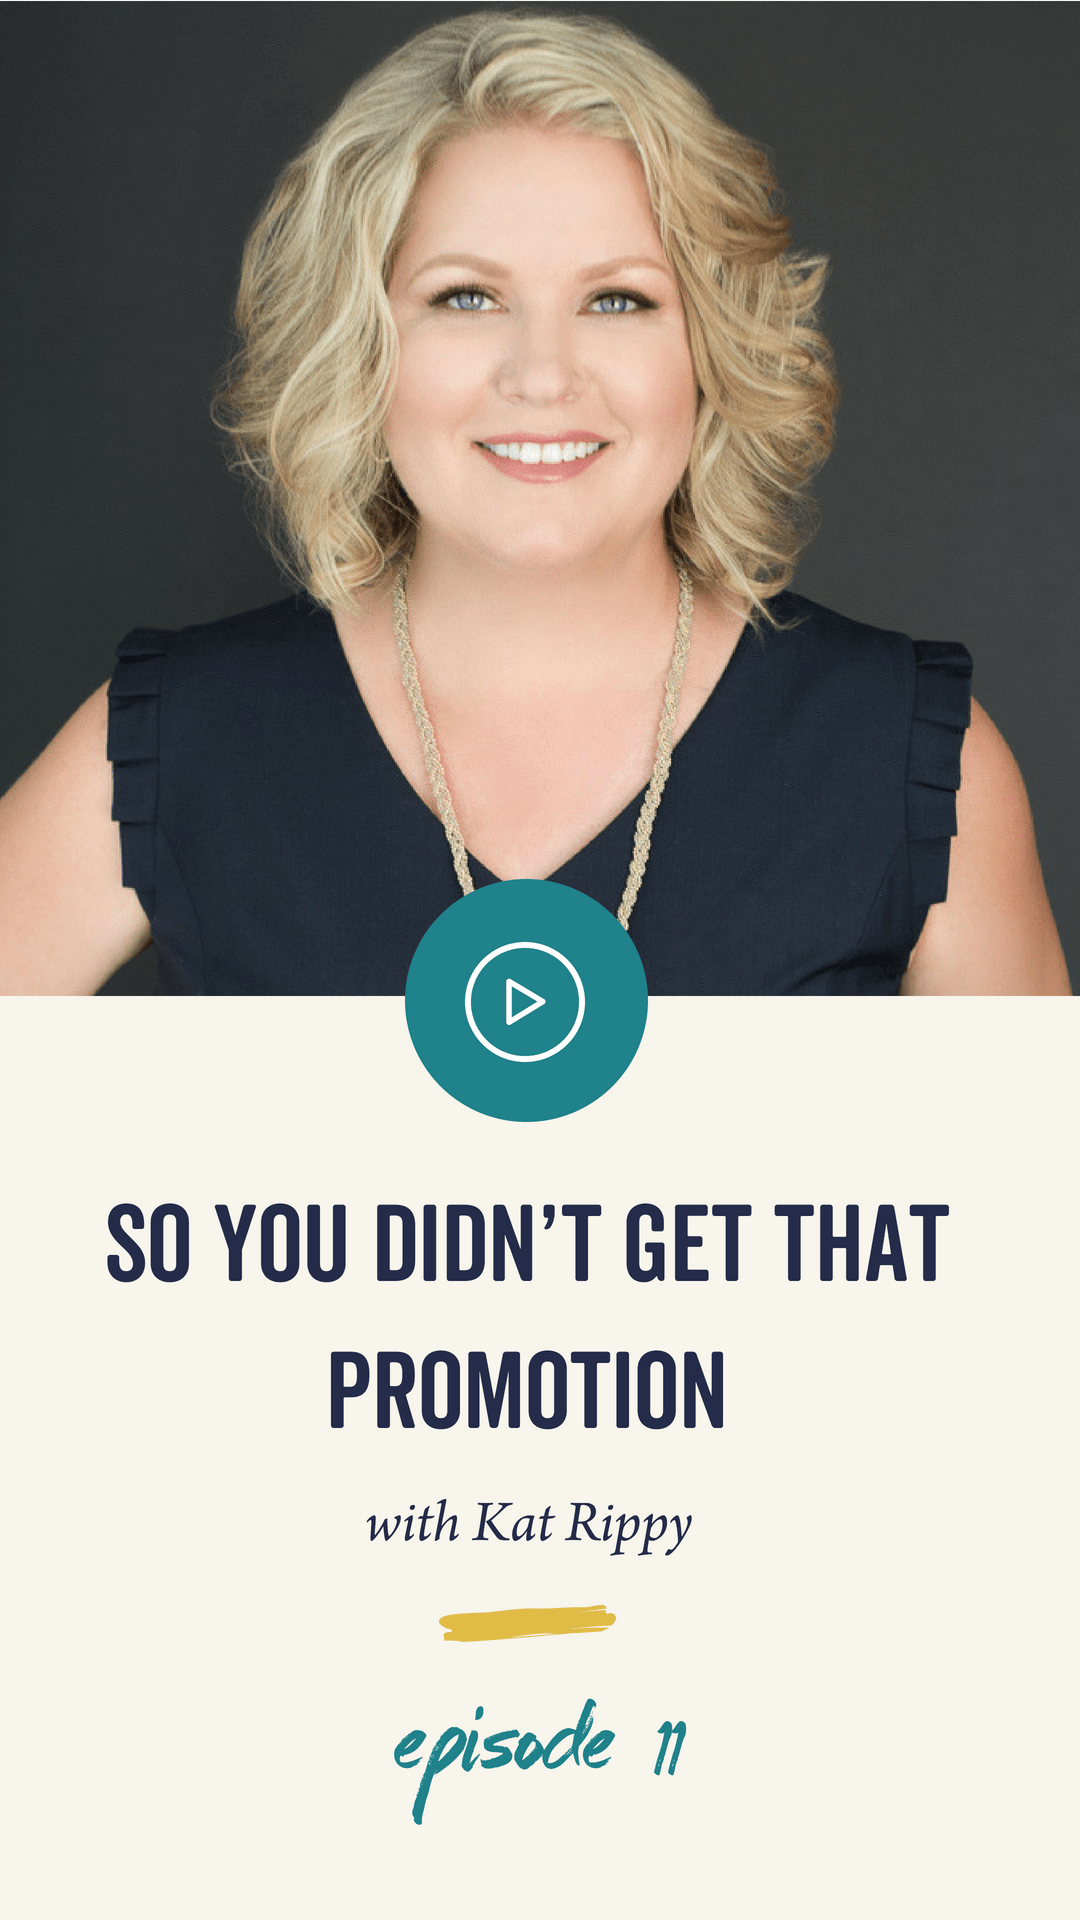 Episode 11: So You Didn’t Get That Promotion